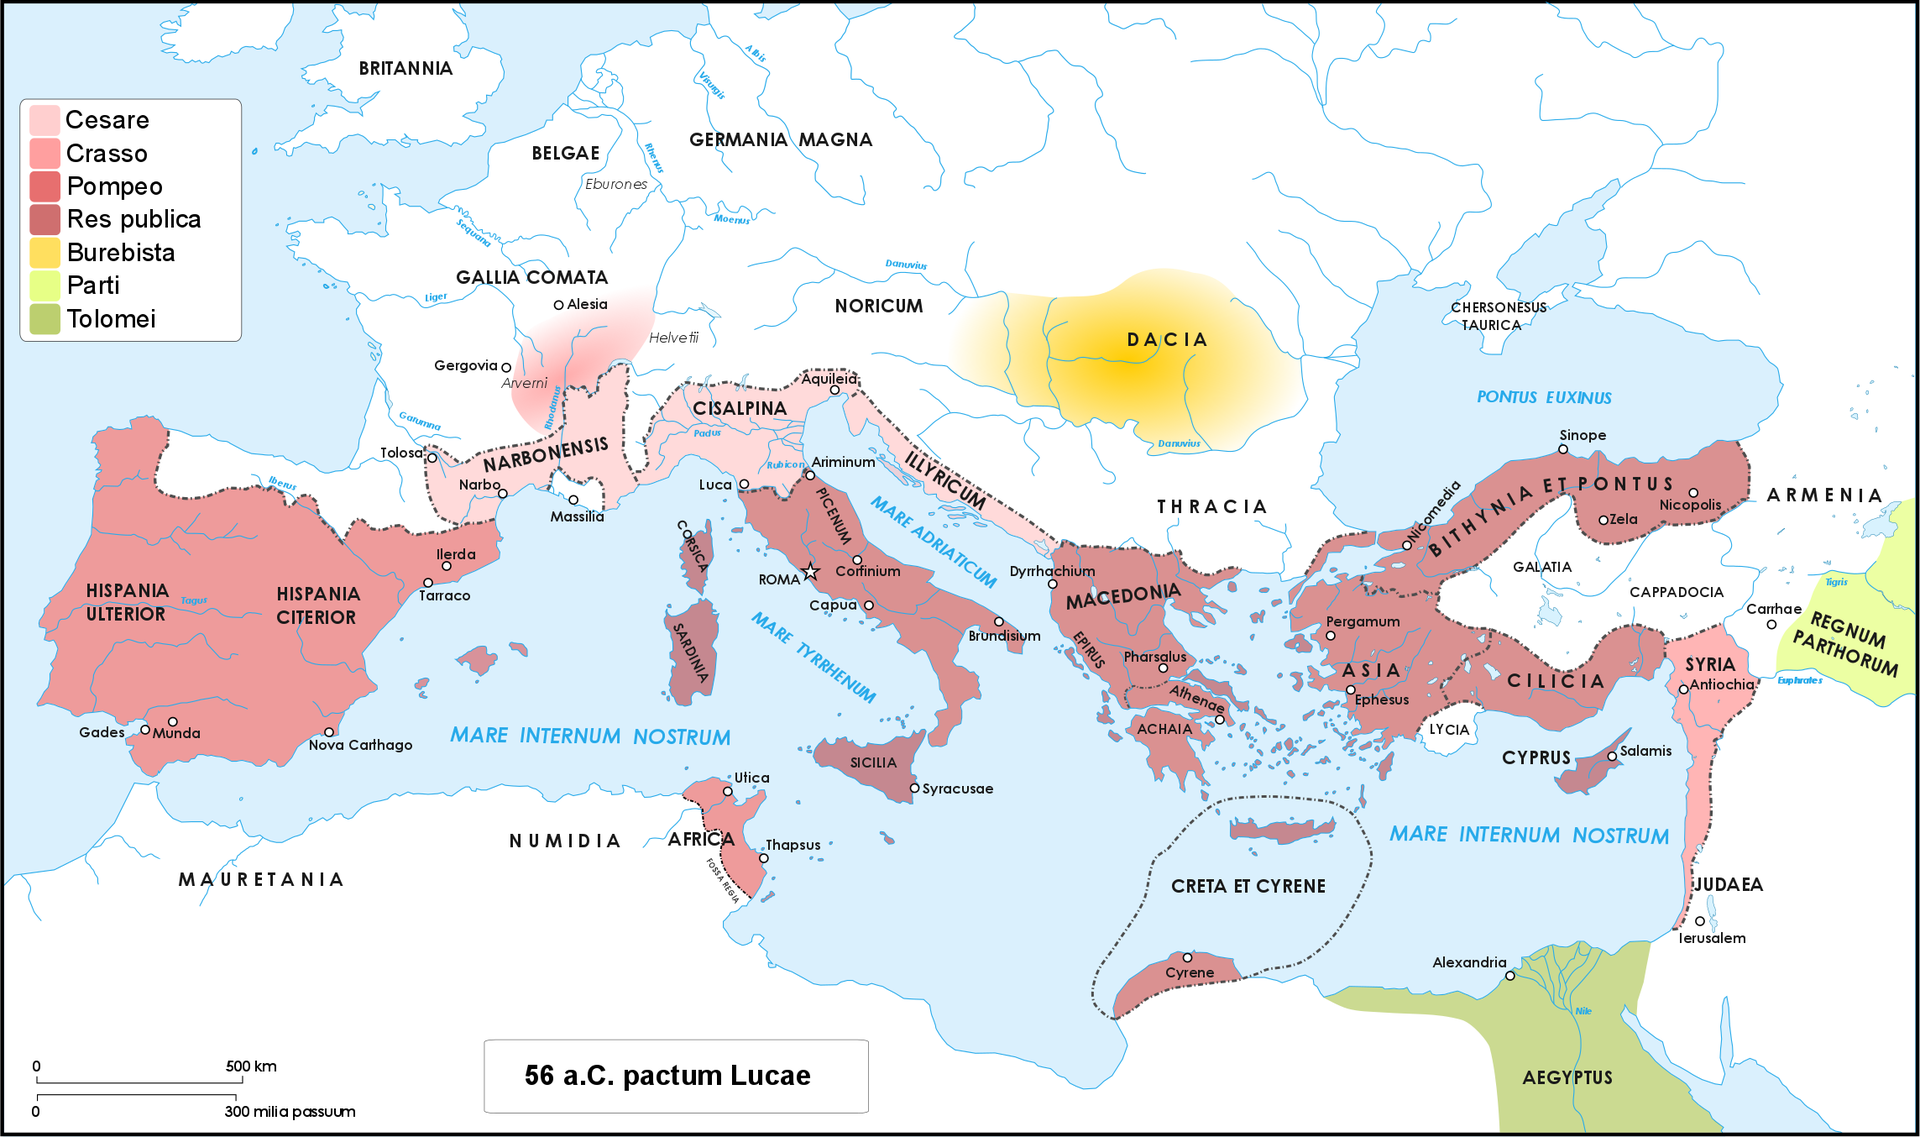 Roman world in 56 BC, when Caesar, Crassus and Pompey meet at Luca for a conference in which they decided: to add another five years to the proconsulship of Caesar in Gaul; to give the province of Syria to Crassus and both Spains and Africa to Pompey